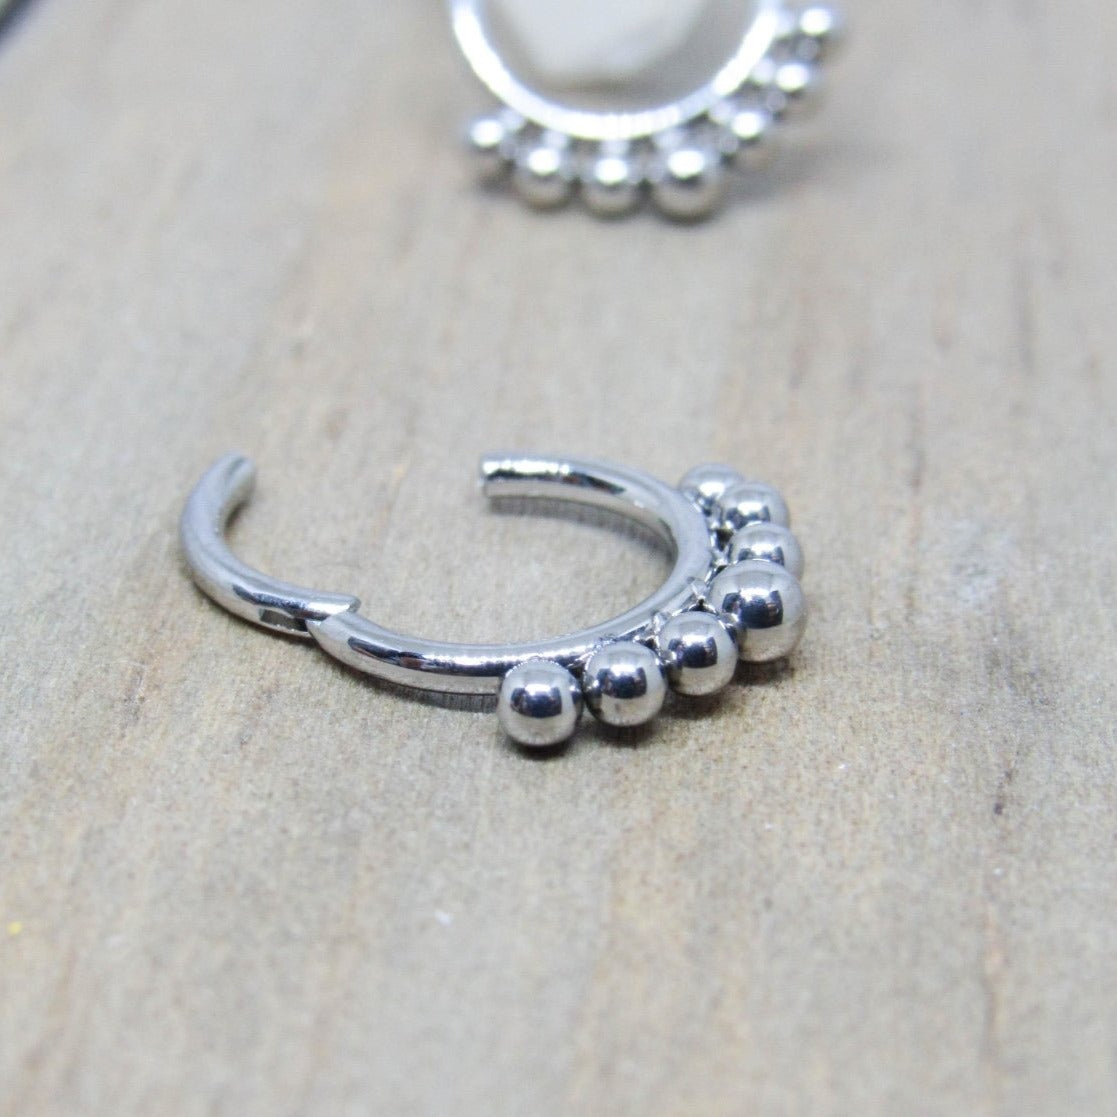 Small Size Silver Nose Ring For Non-Piercing - J.S Jewellery Store PK